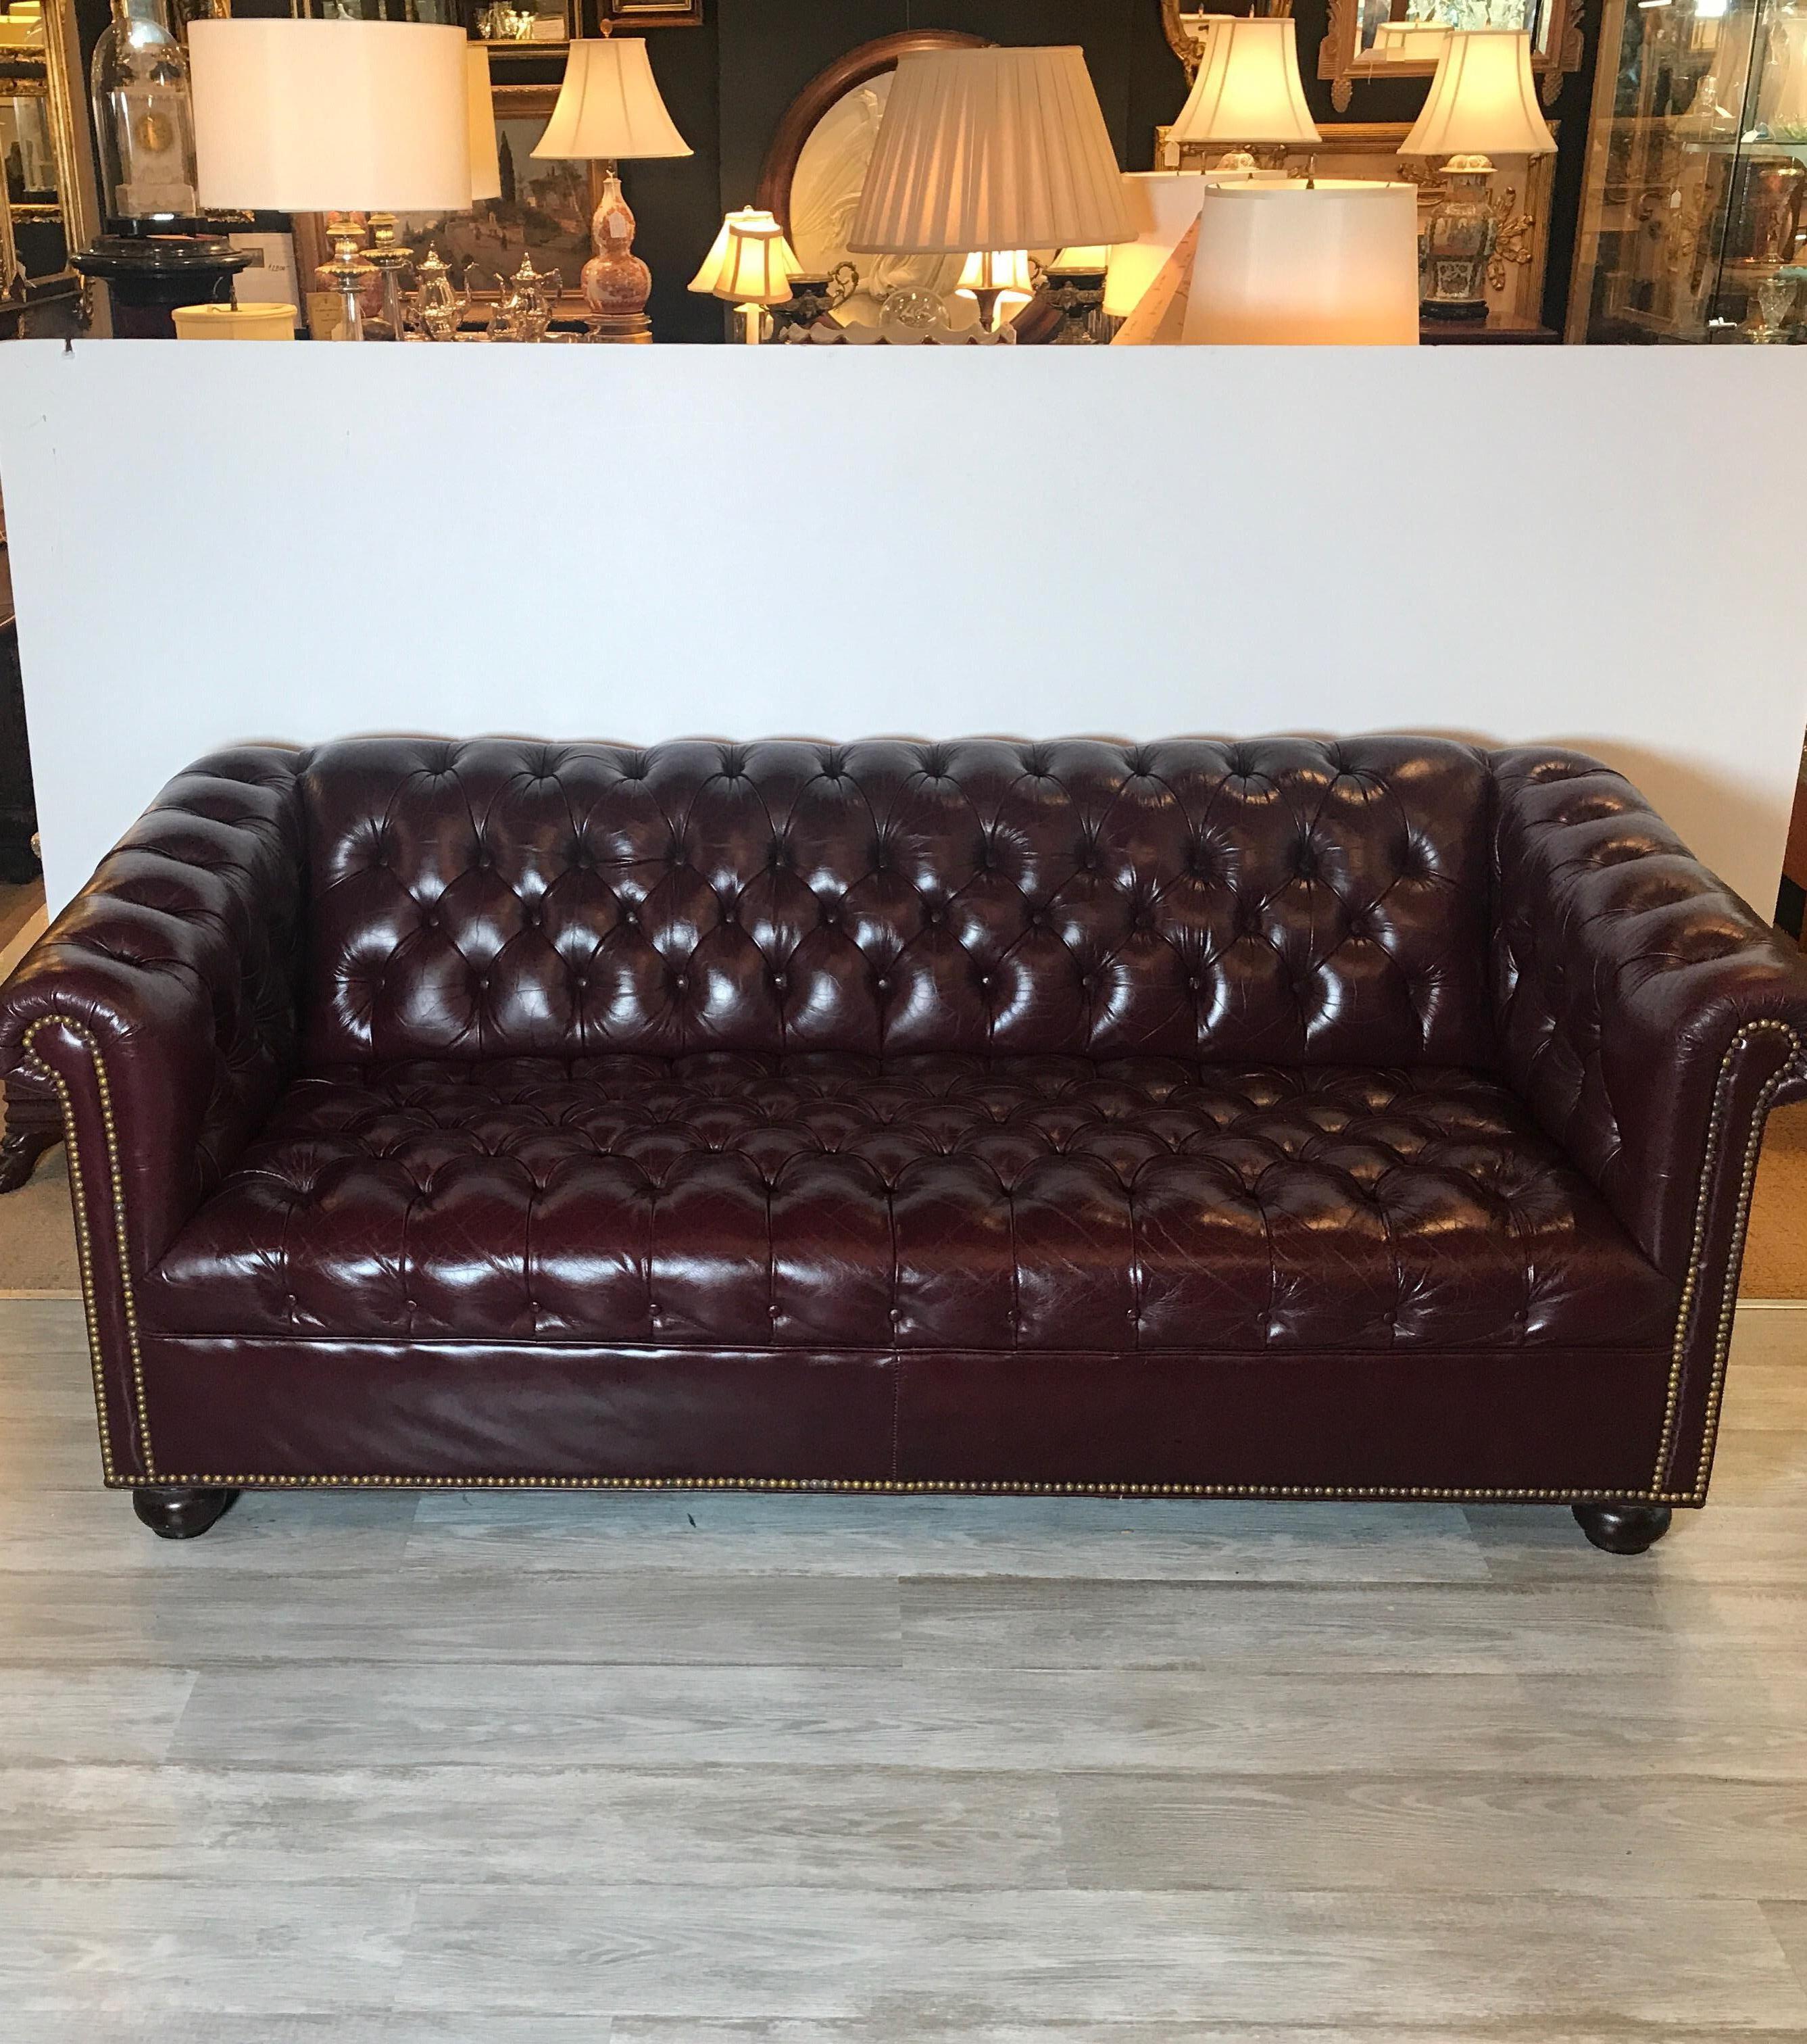 A well cared for English cordovan leather Chesterfield sofa with antiqued nailhead trim. The tufted attached seat back and arms with brass nailhead trim along the arms and bottom. The sofa is a perfect size at 76 inches long with original well cared